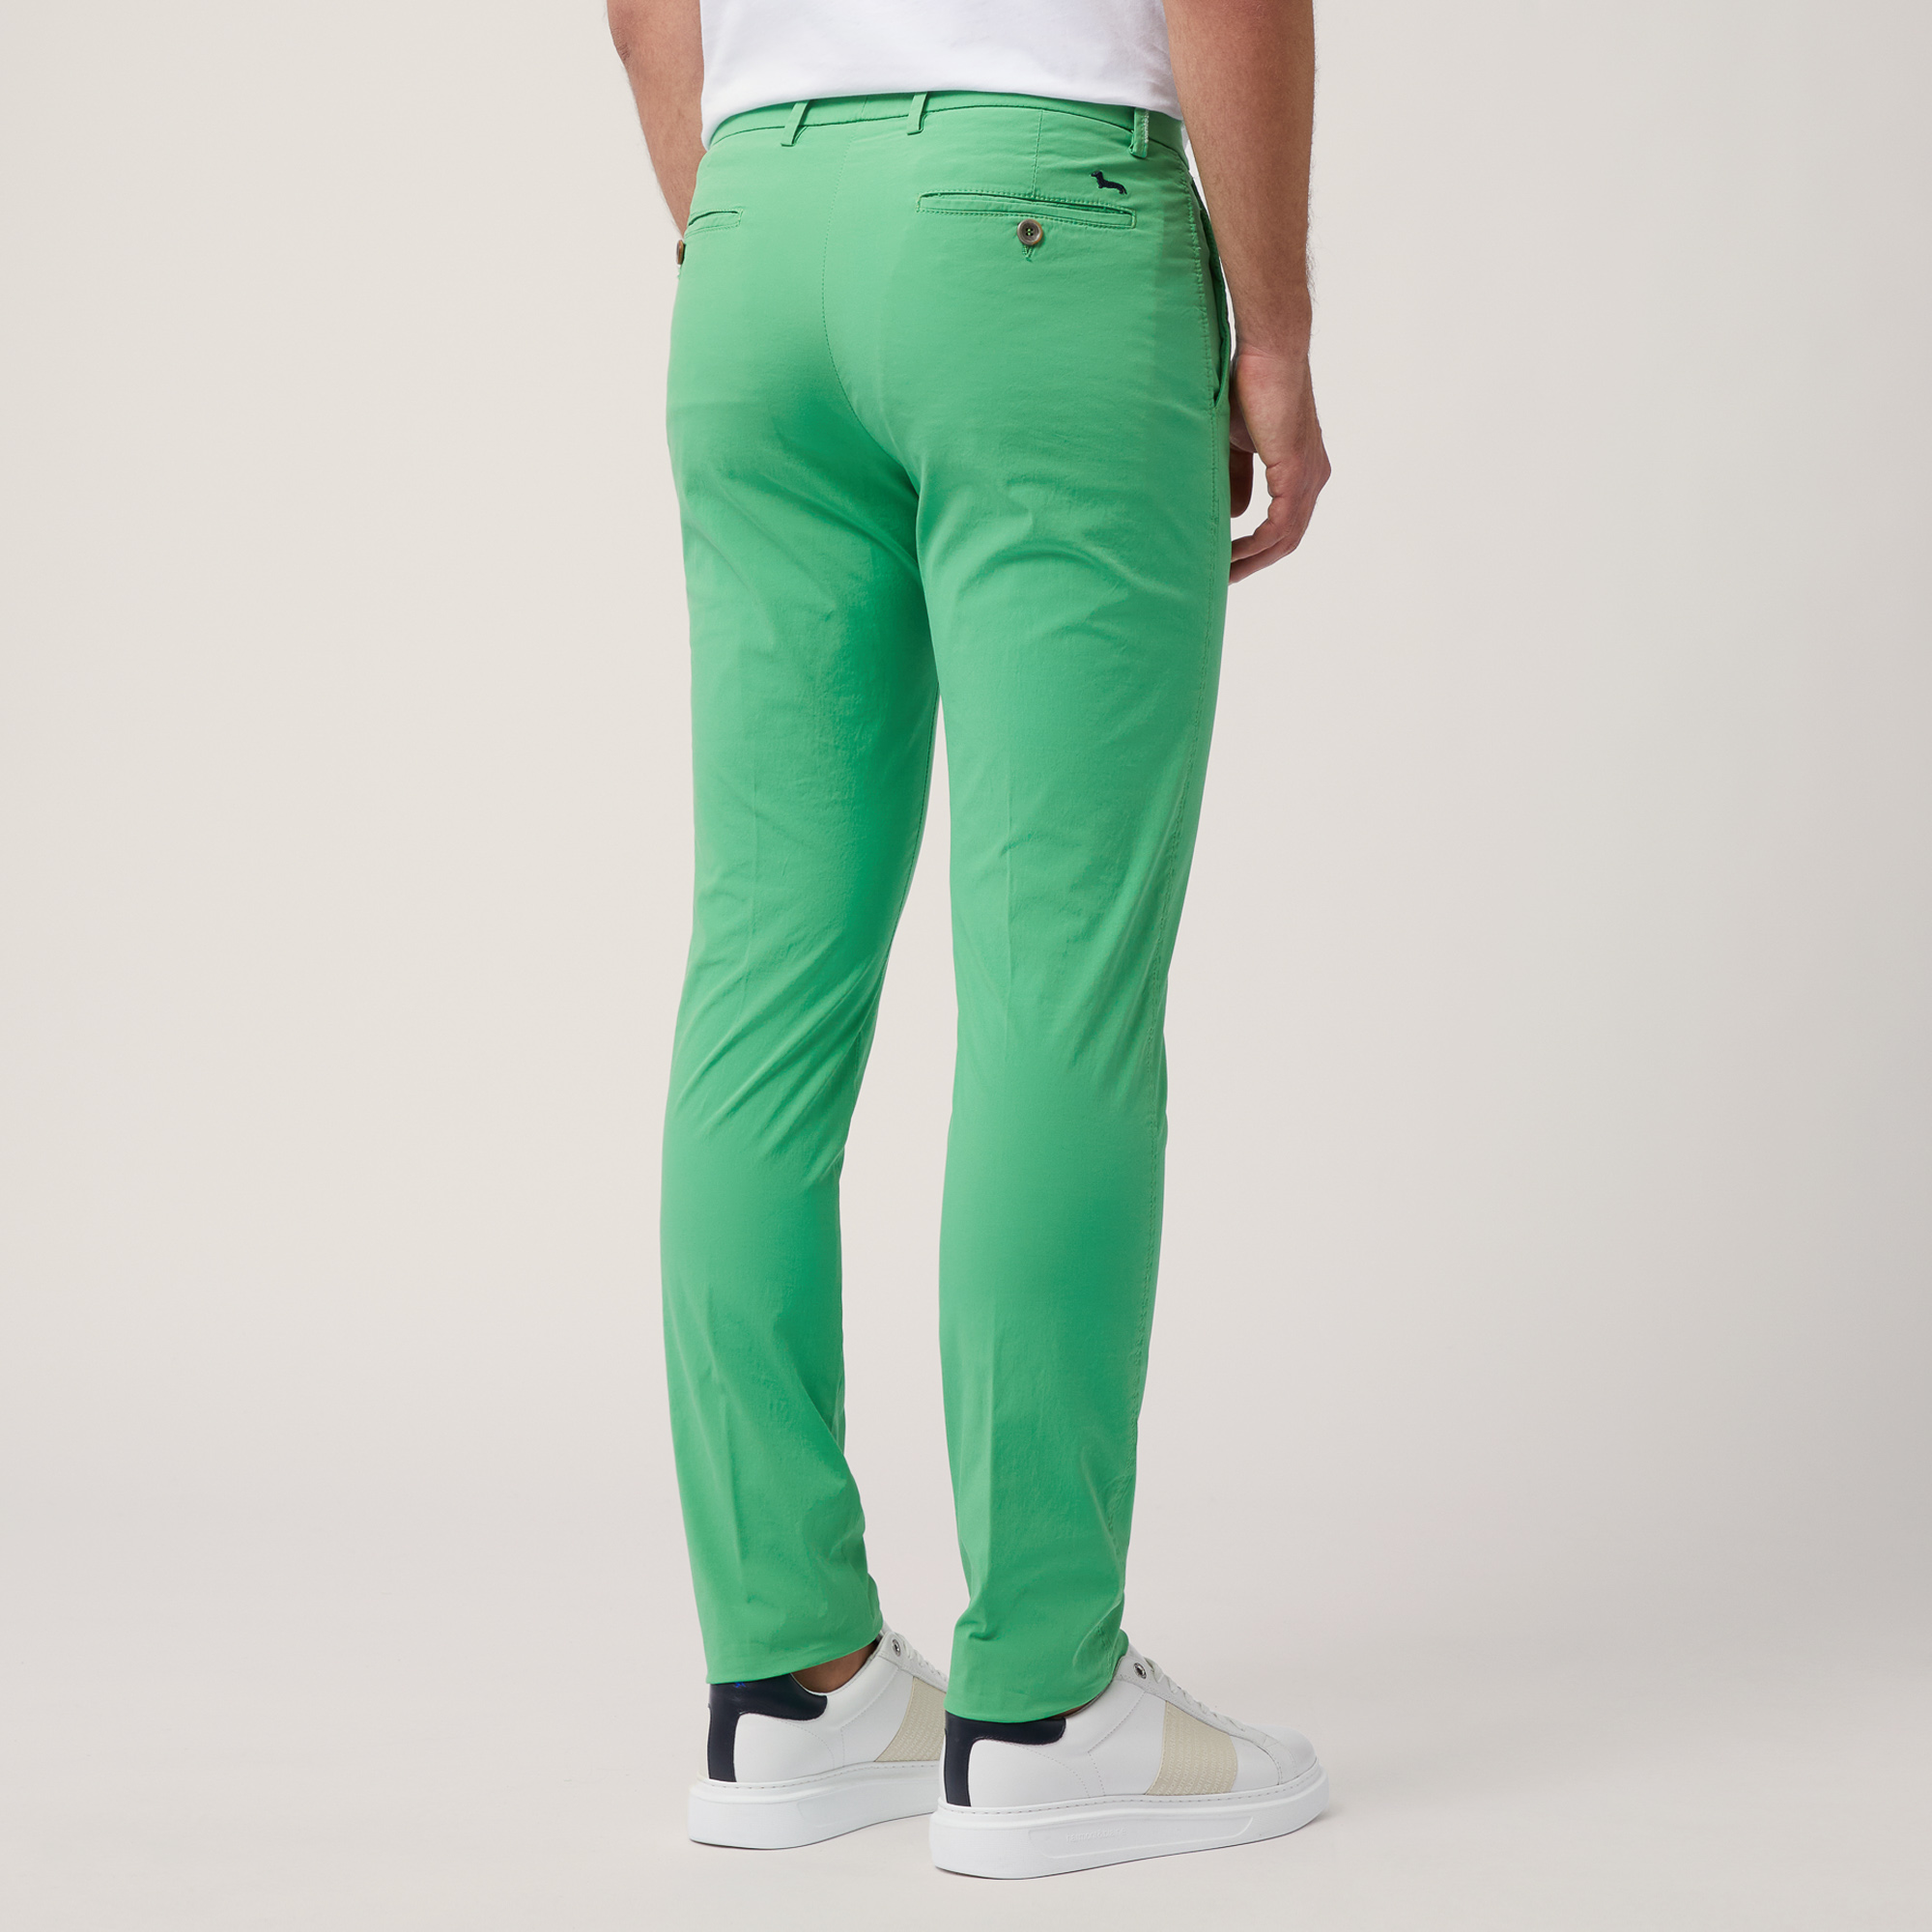 Narrow Fit Chino Pants, Herb, large image number 1